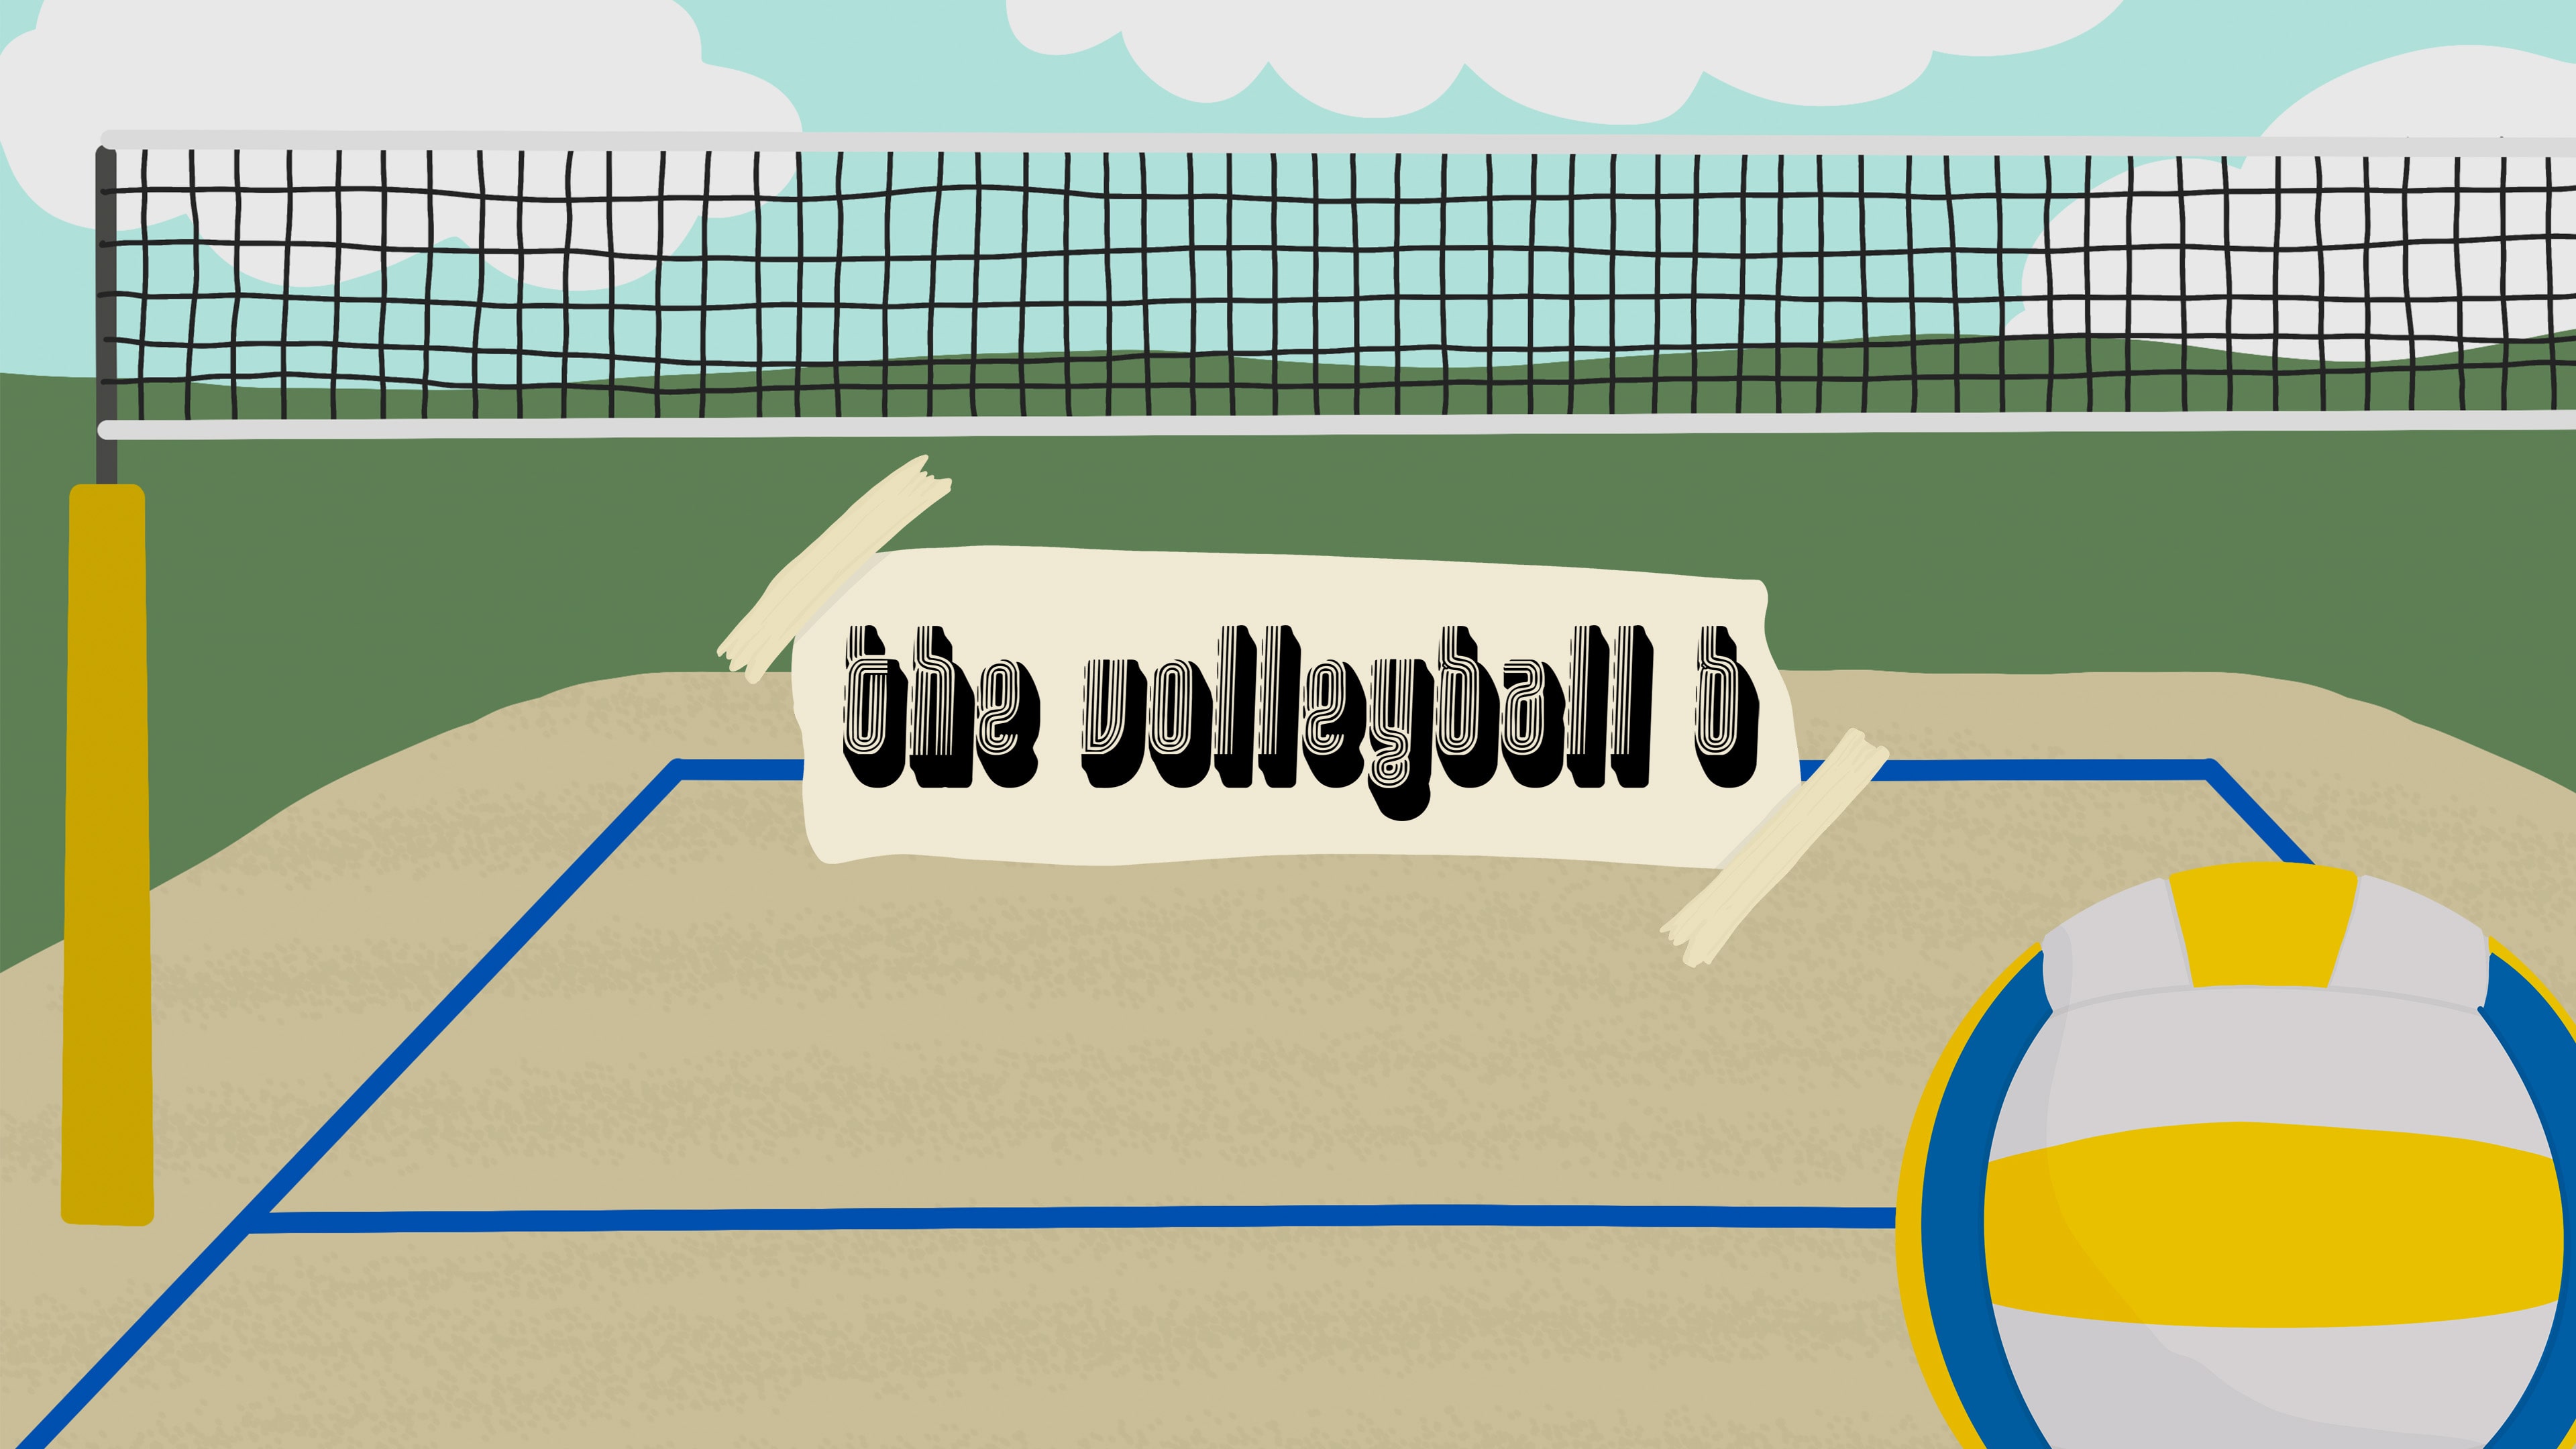 The Volleyball B